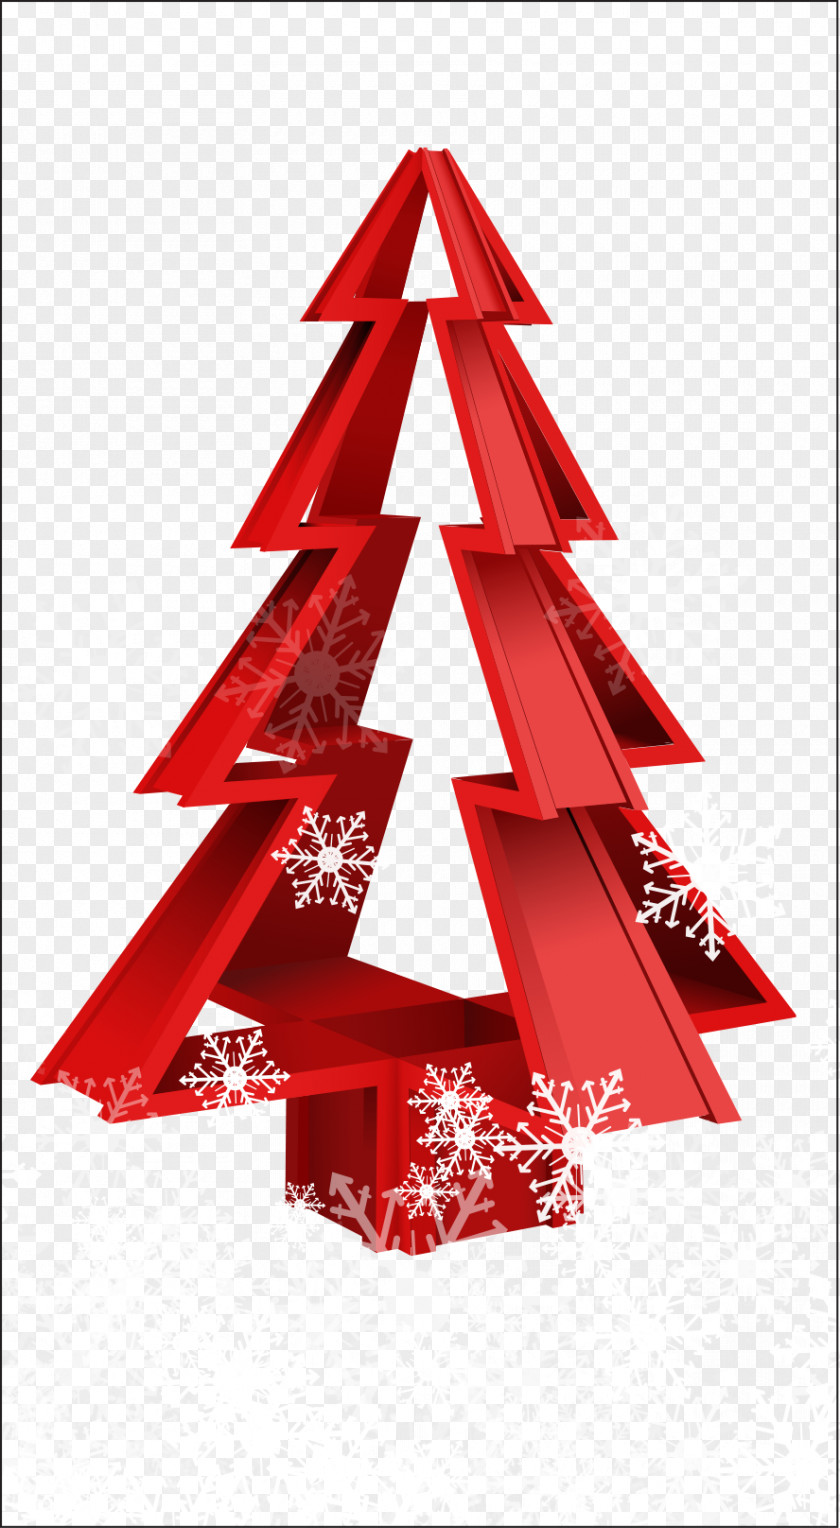 City Christmas Tree Candy Cane PNG